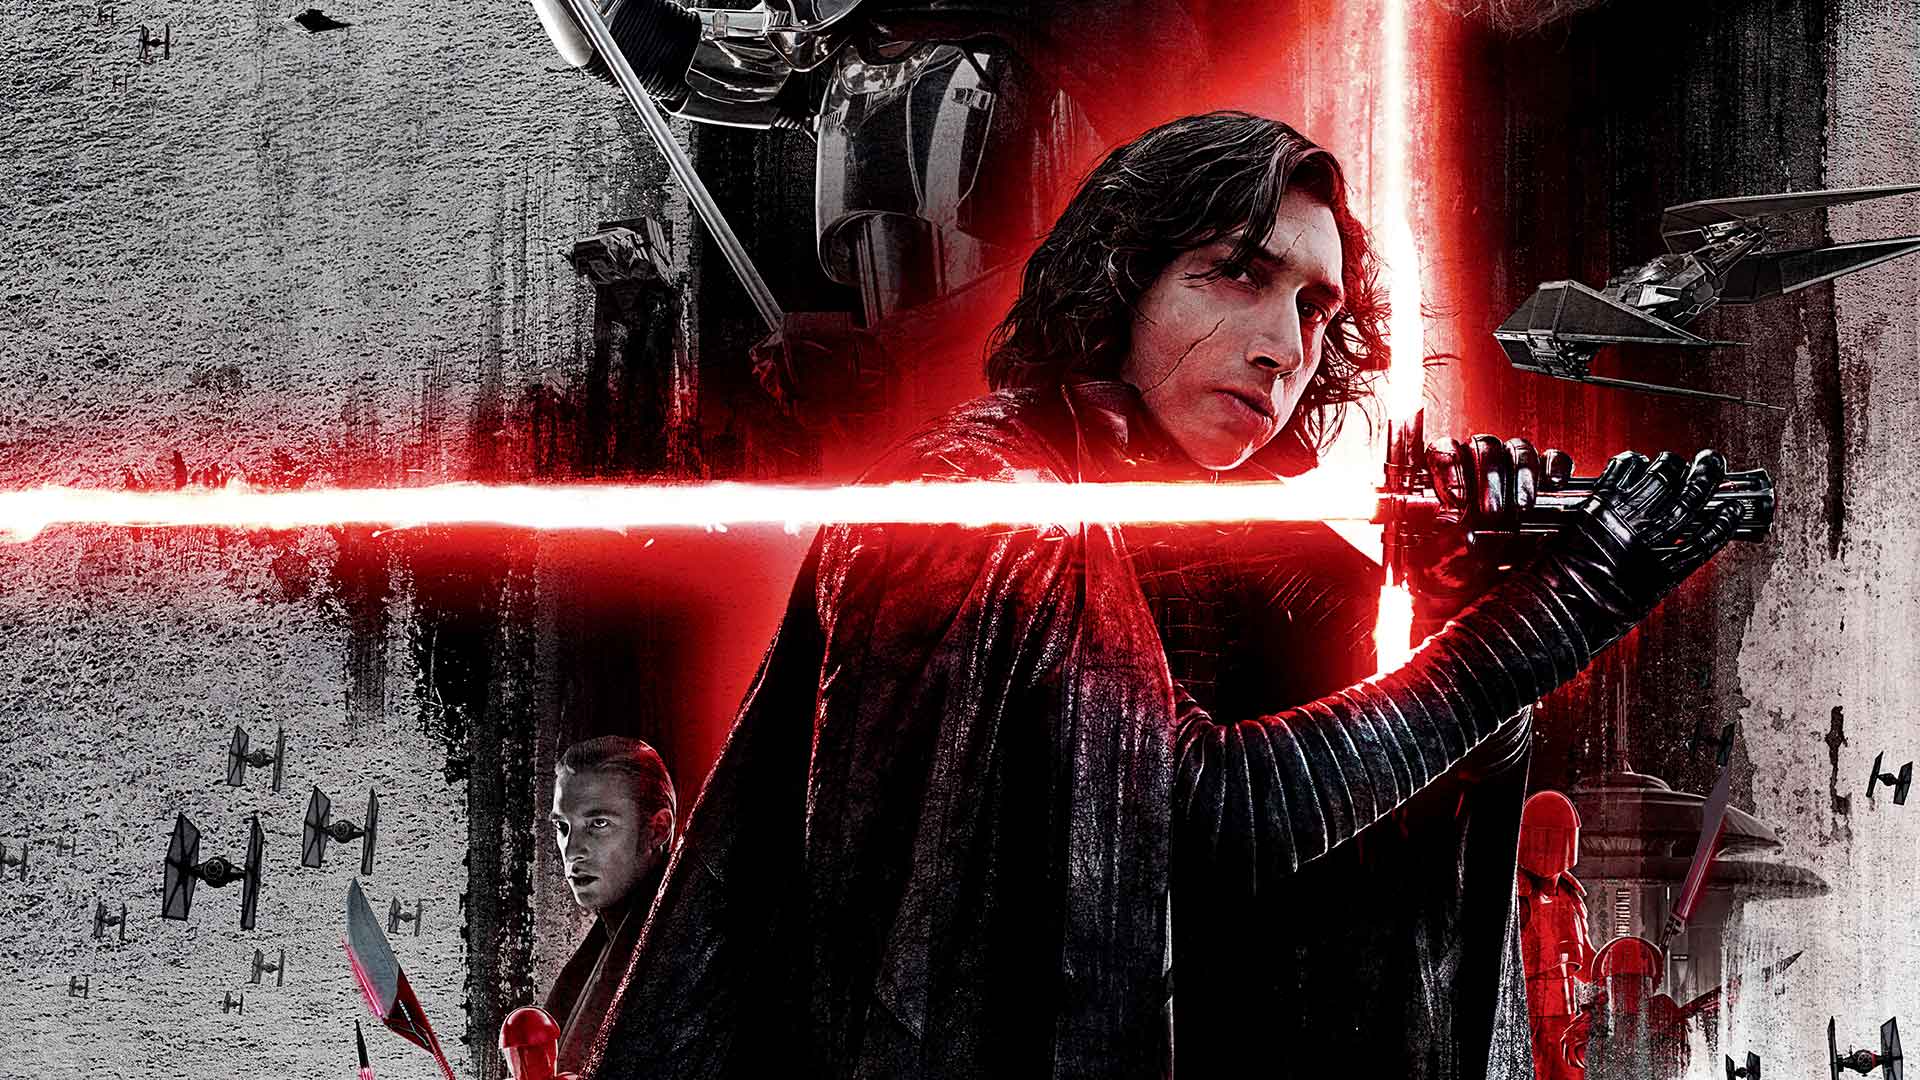 Star Wars The Last Jedi Wallpapers, HD Star Wars The Last Jedi Backgrounds,  Free Images Download